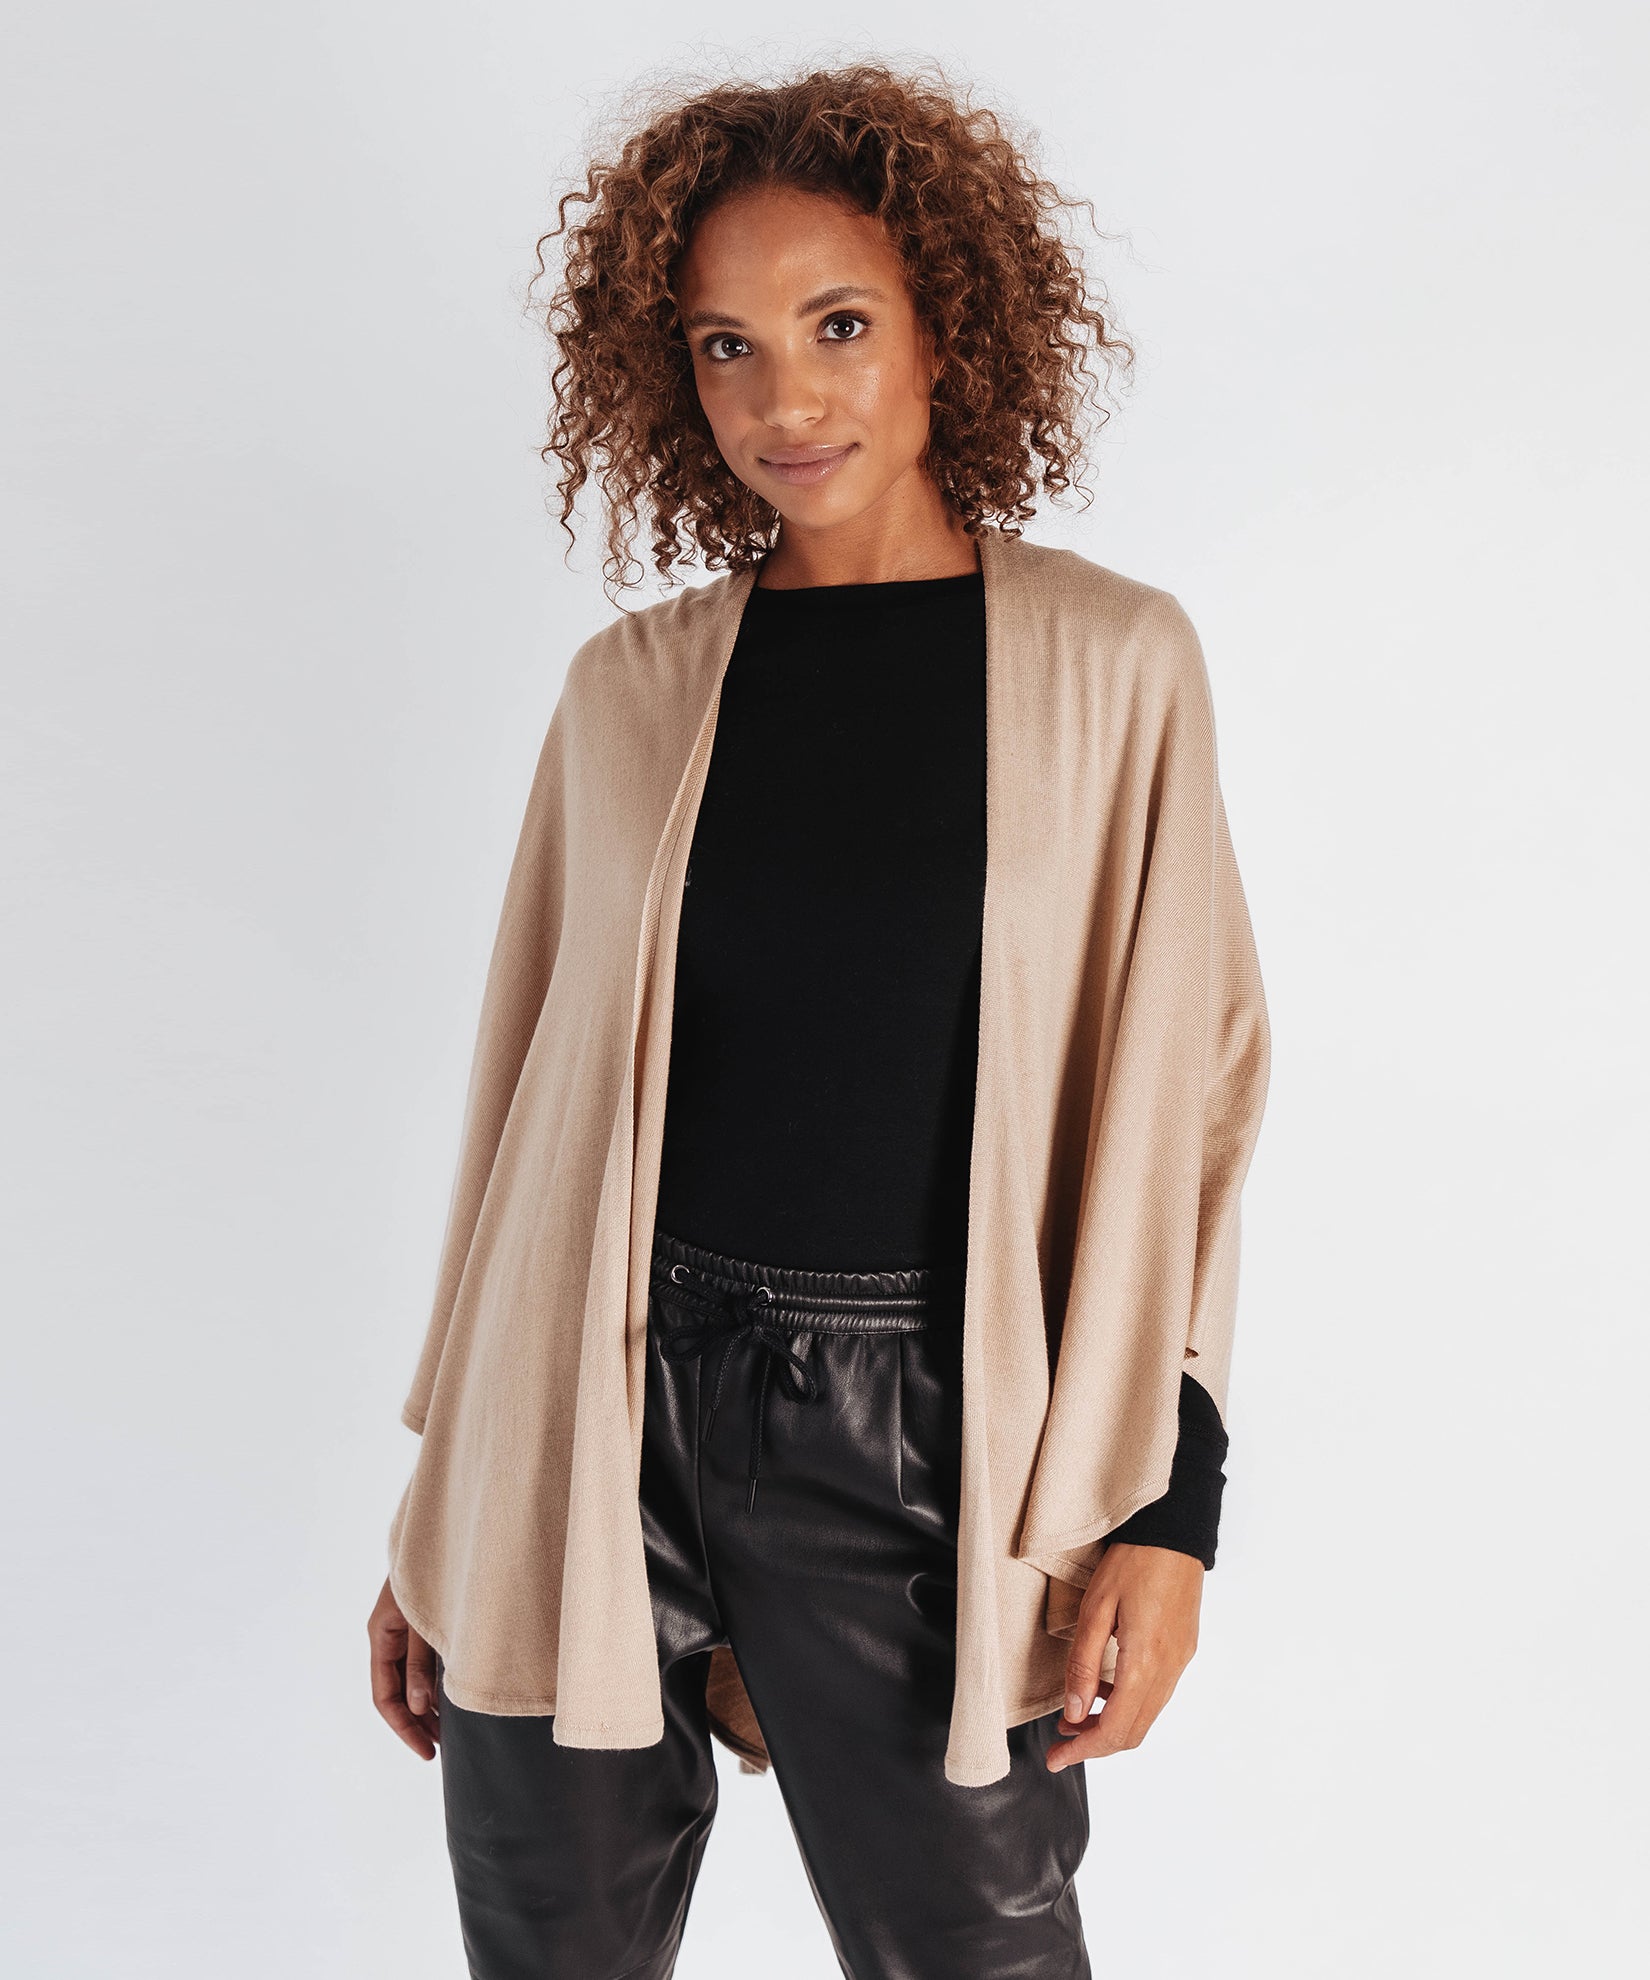 Echo Essentials Luxe Rounded Ruana in color Echo Oatmeal